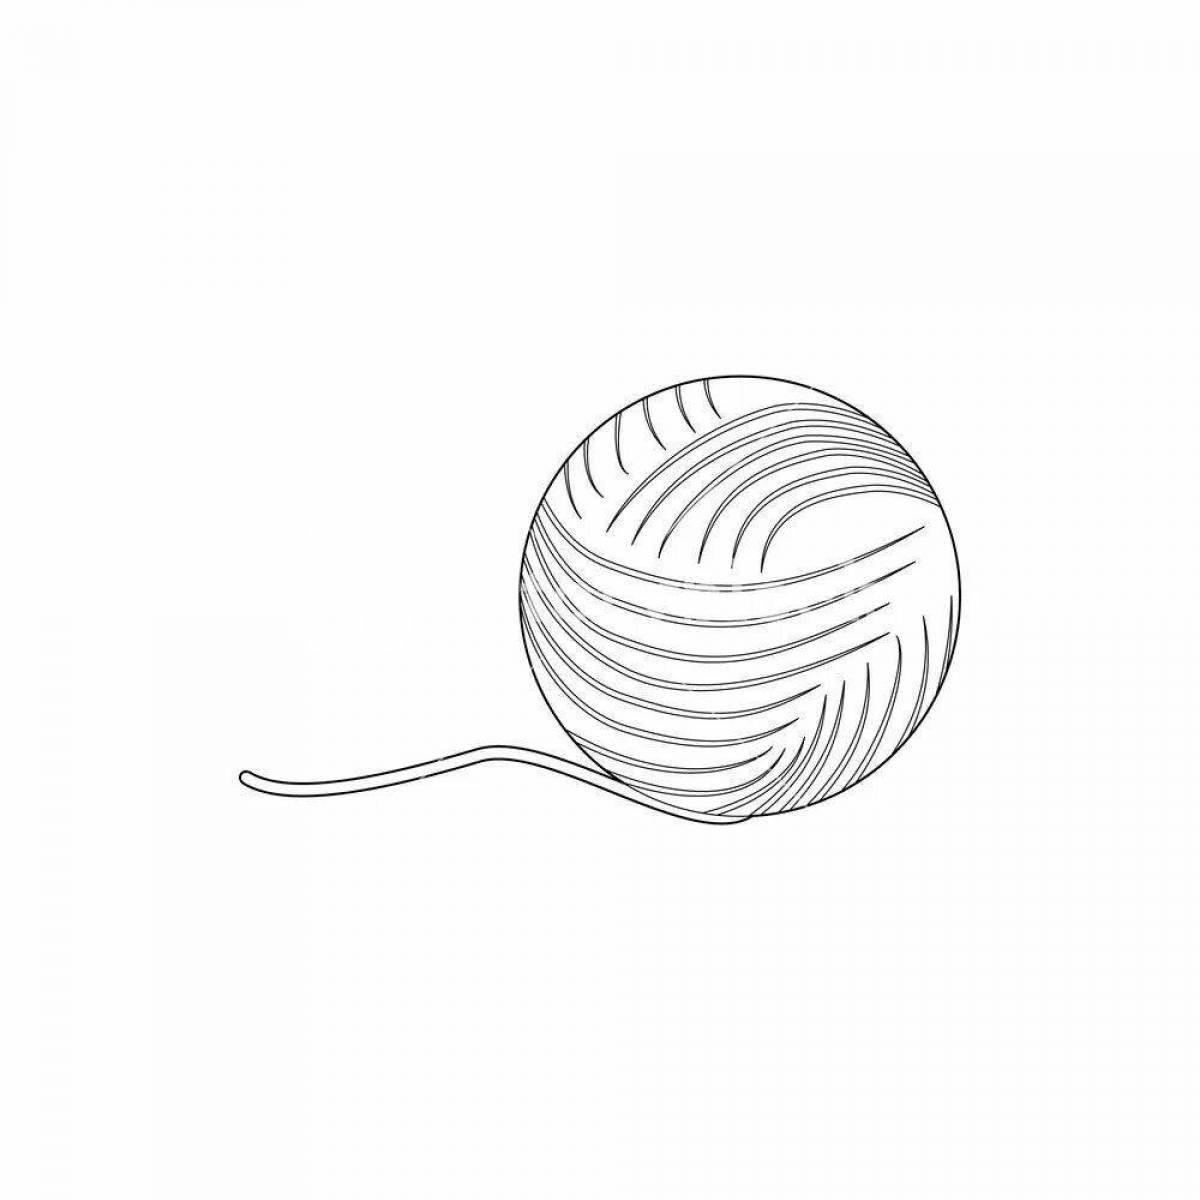 Coloring page inviting ball of thread